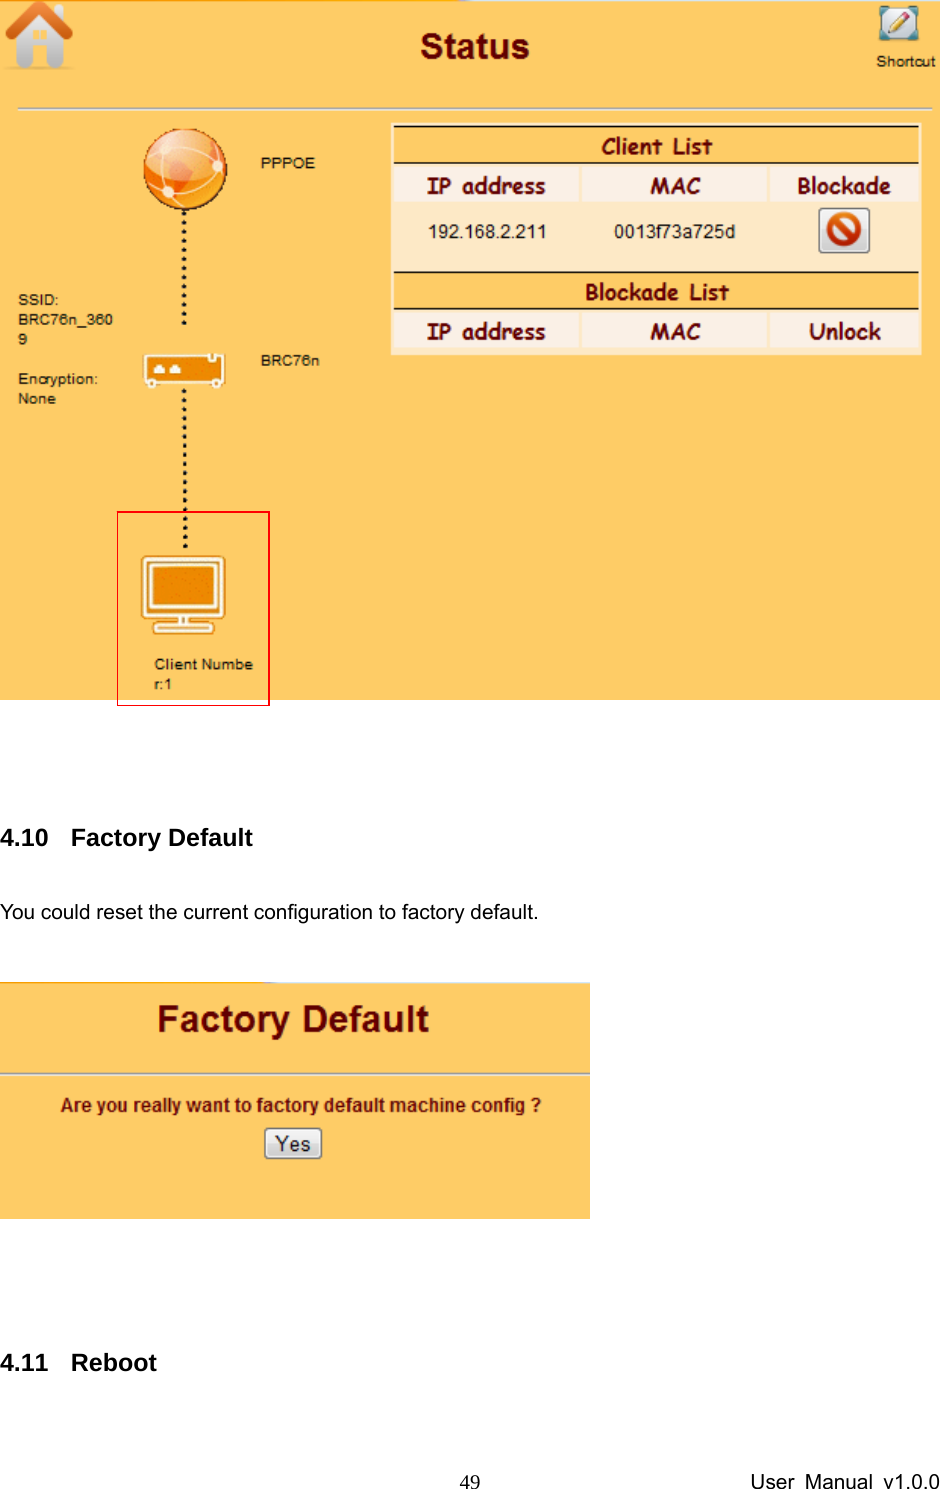                 User Manual v1.0.0 49  4.10 Factory Default You could reset the current configuration to factory default.   4.11 Reboot 